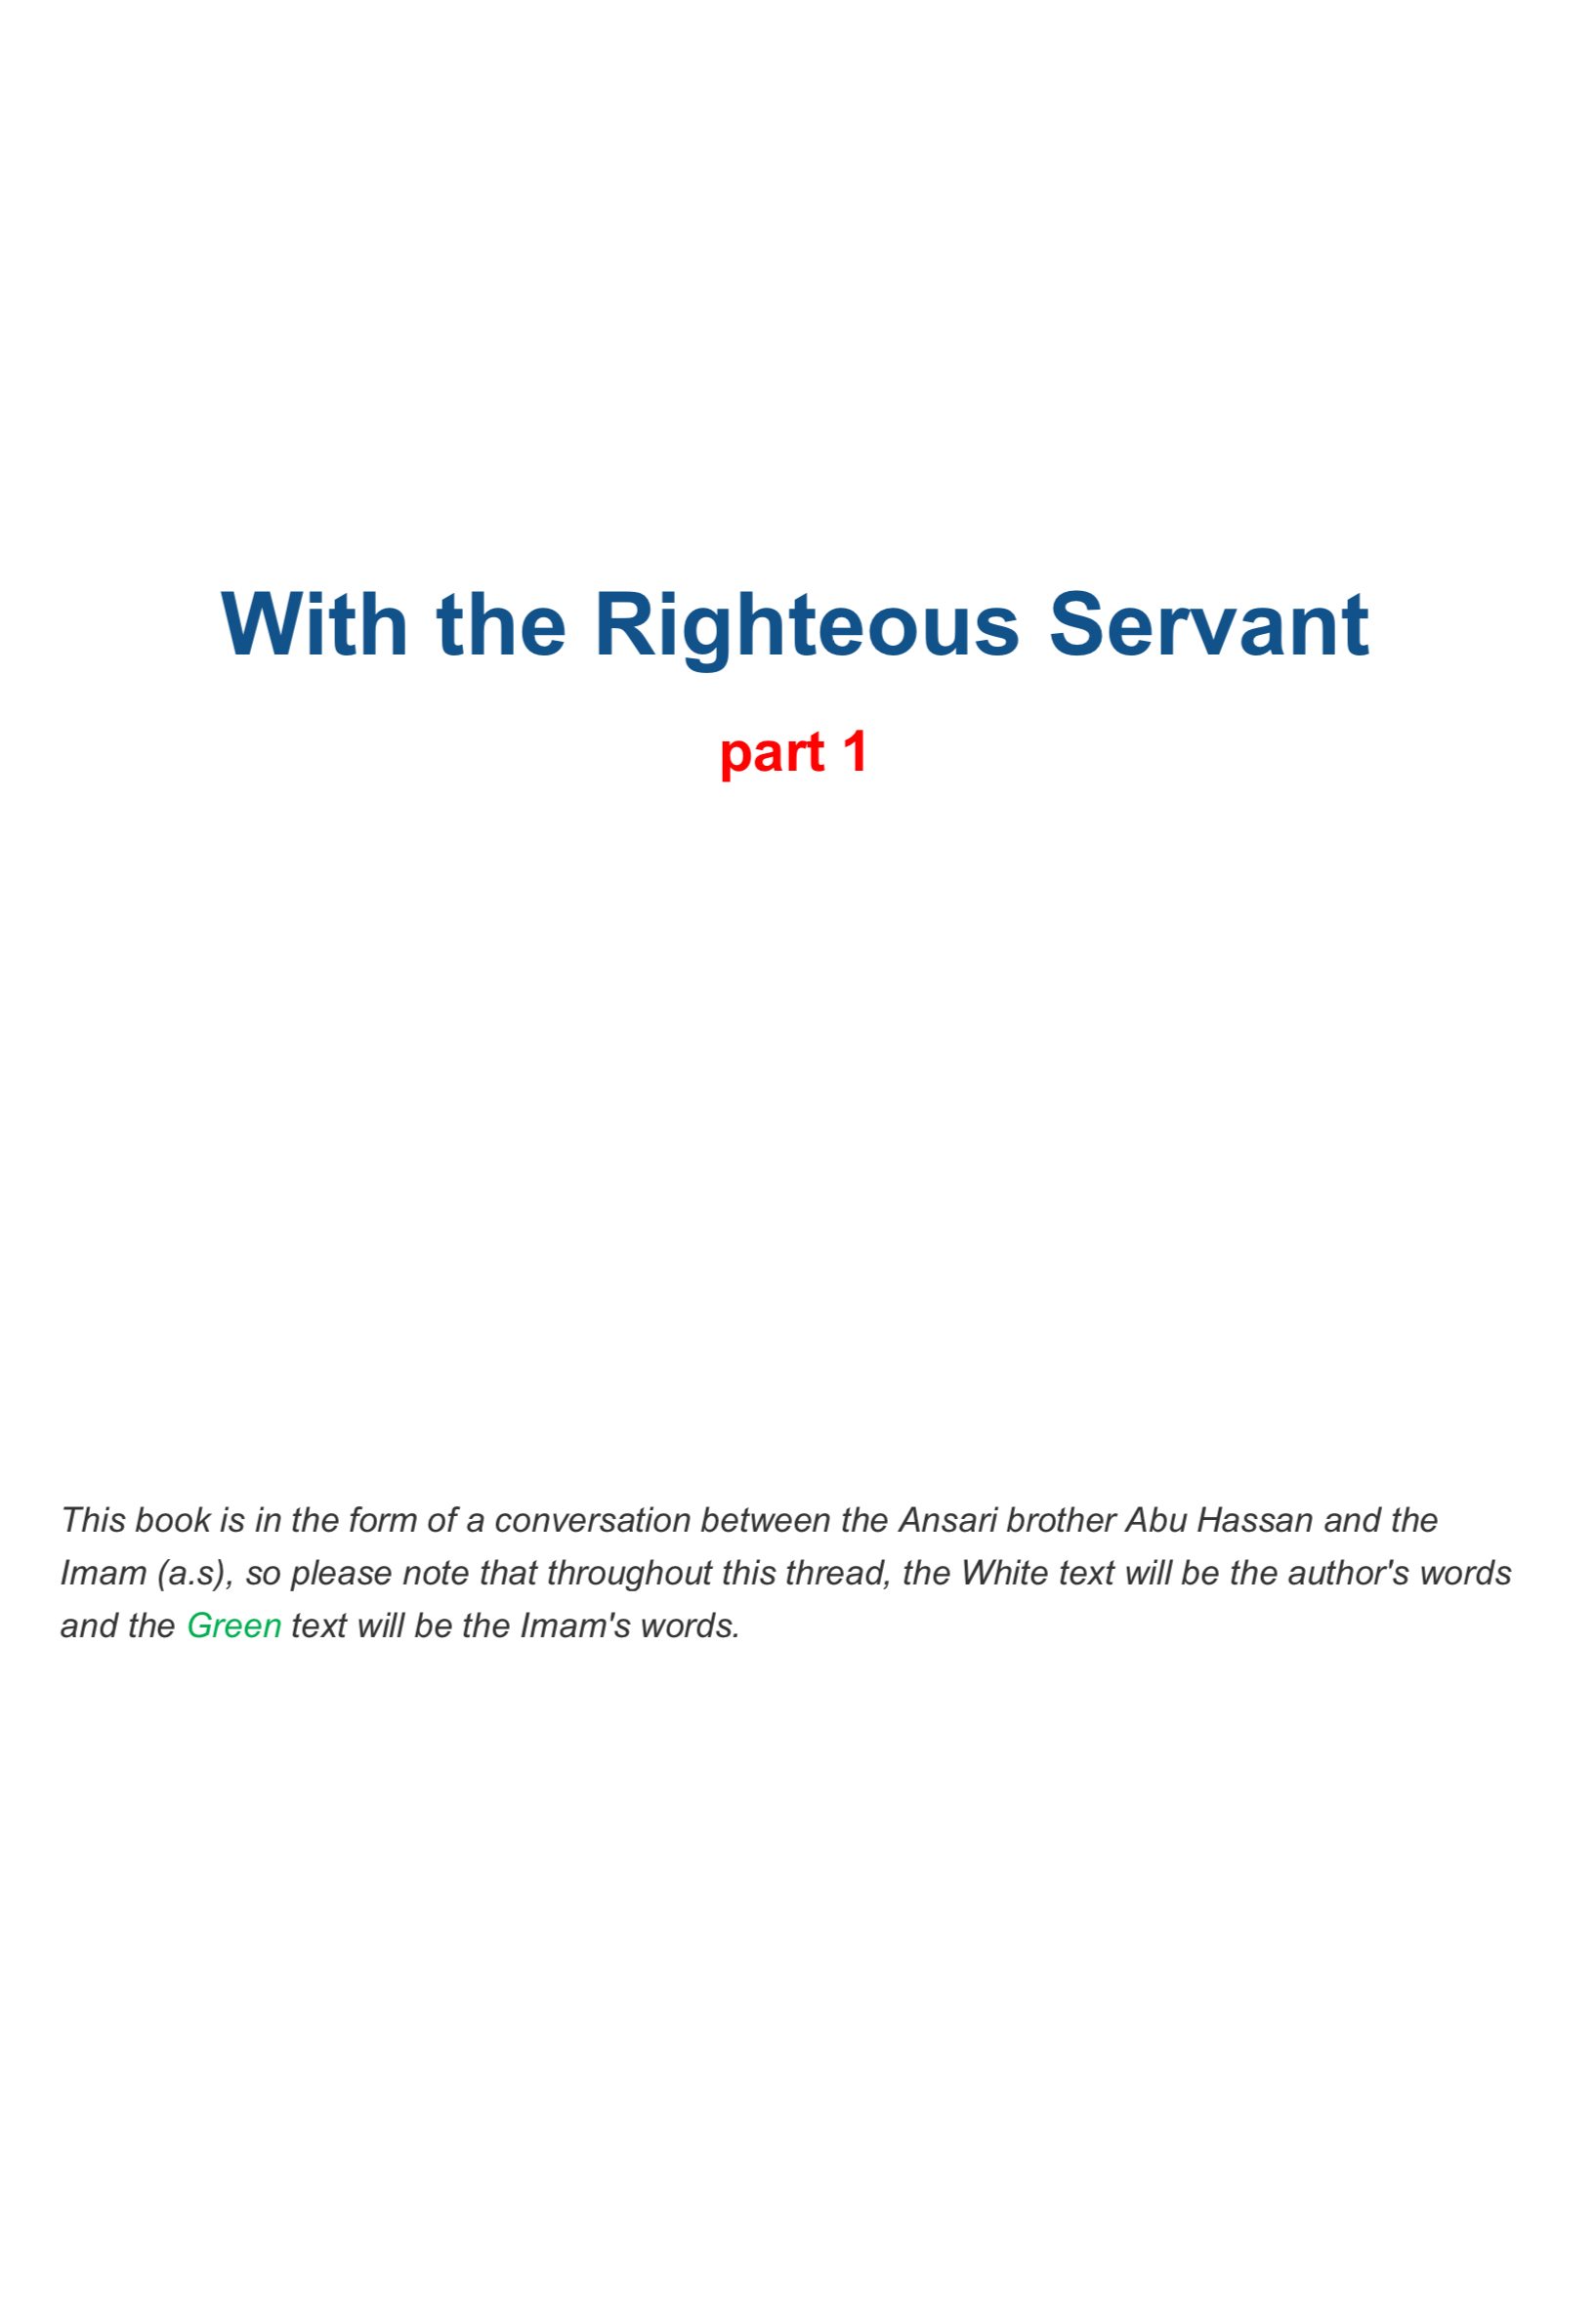 with_the_righteous_servent_part_1